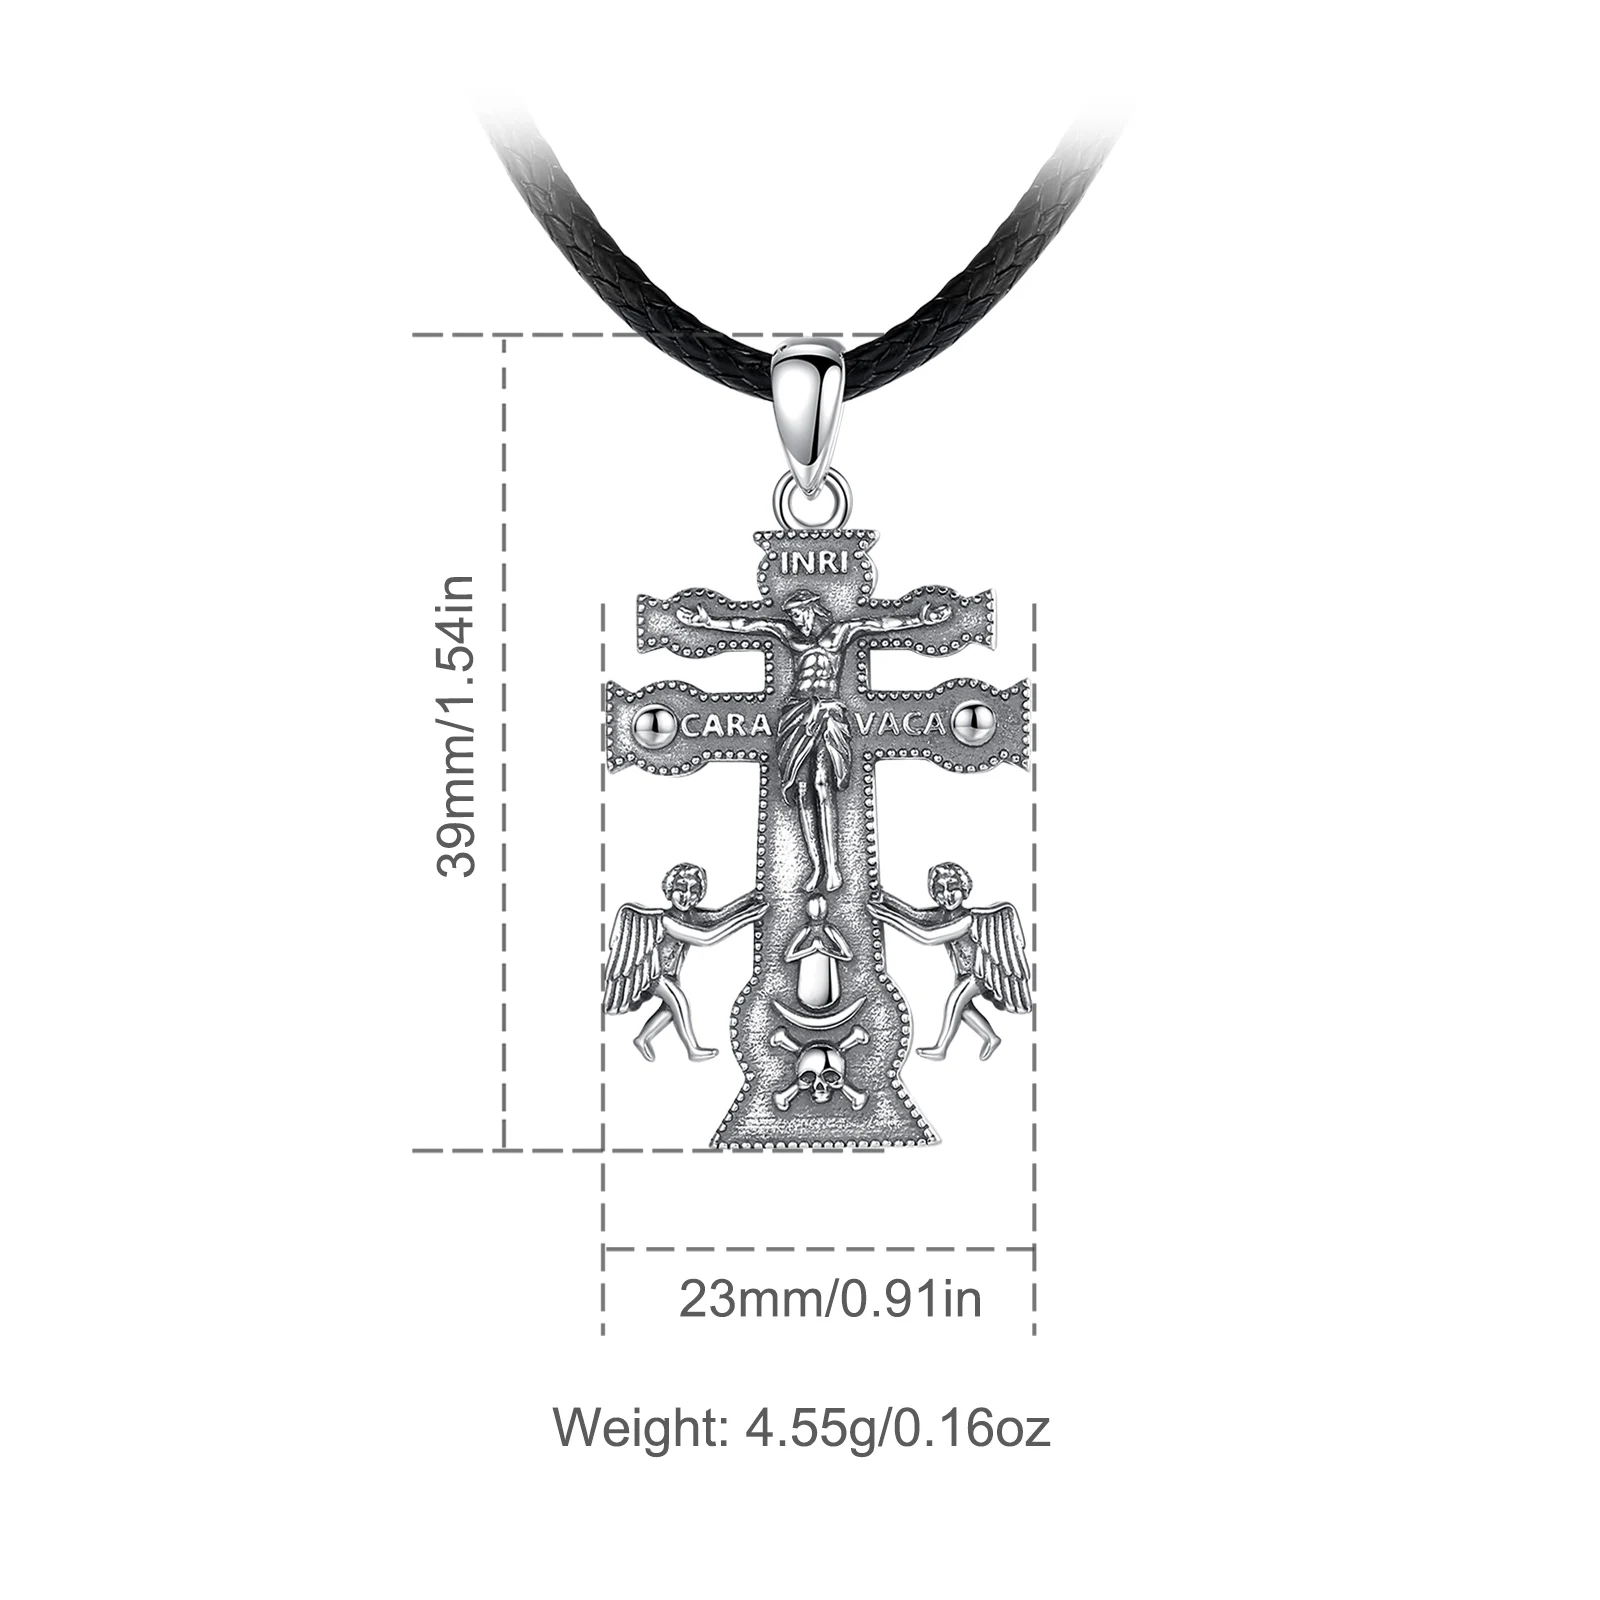 Caravaca Cross Jewelry Eudora 925 Sterling Silver Cross Necklace for Man Woman Angel Christian Personality  Pendant Banquet Gift